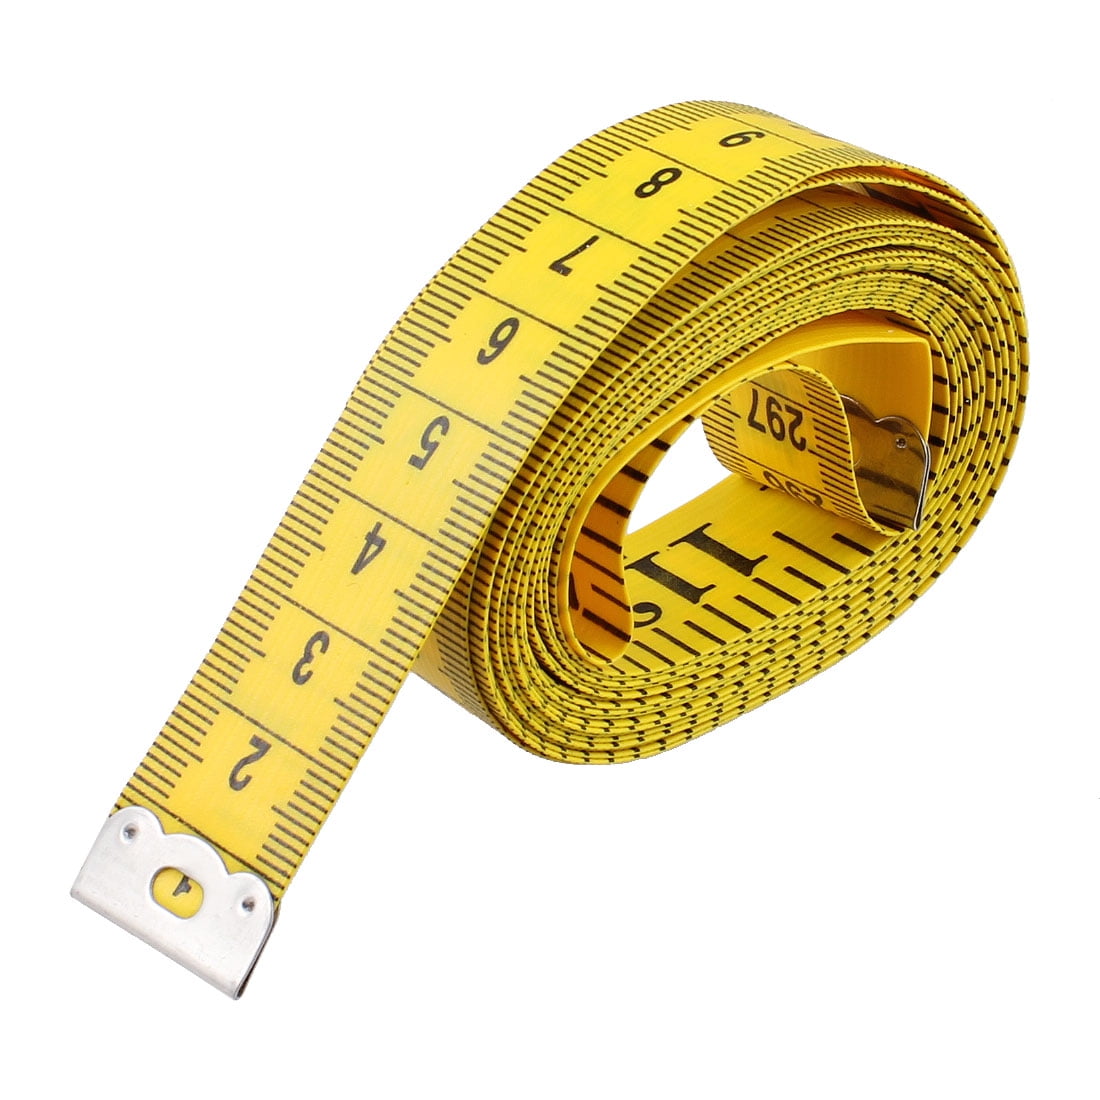 New 120 Inch Soft Tape Measure Sewing Tailor Ruler With Centimeters Scale BLUS 